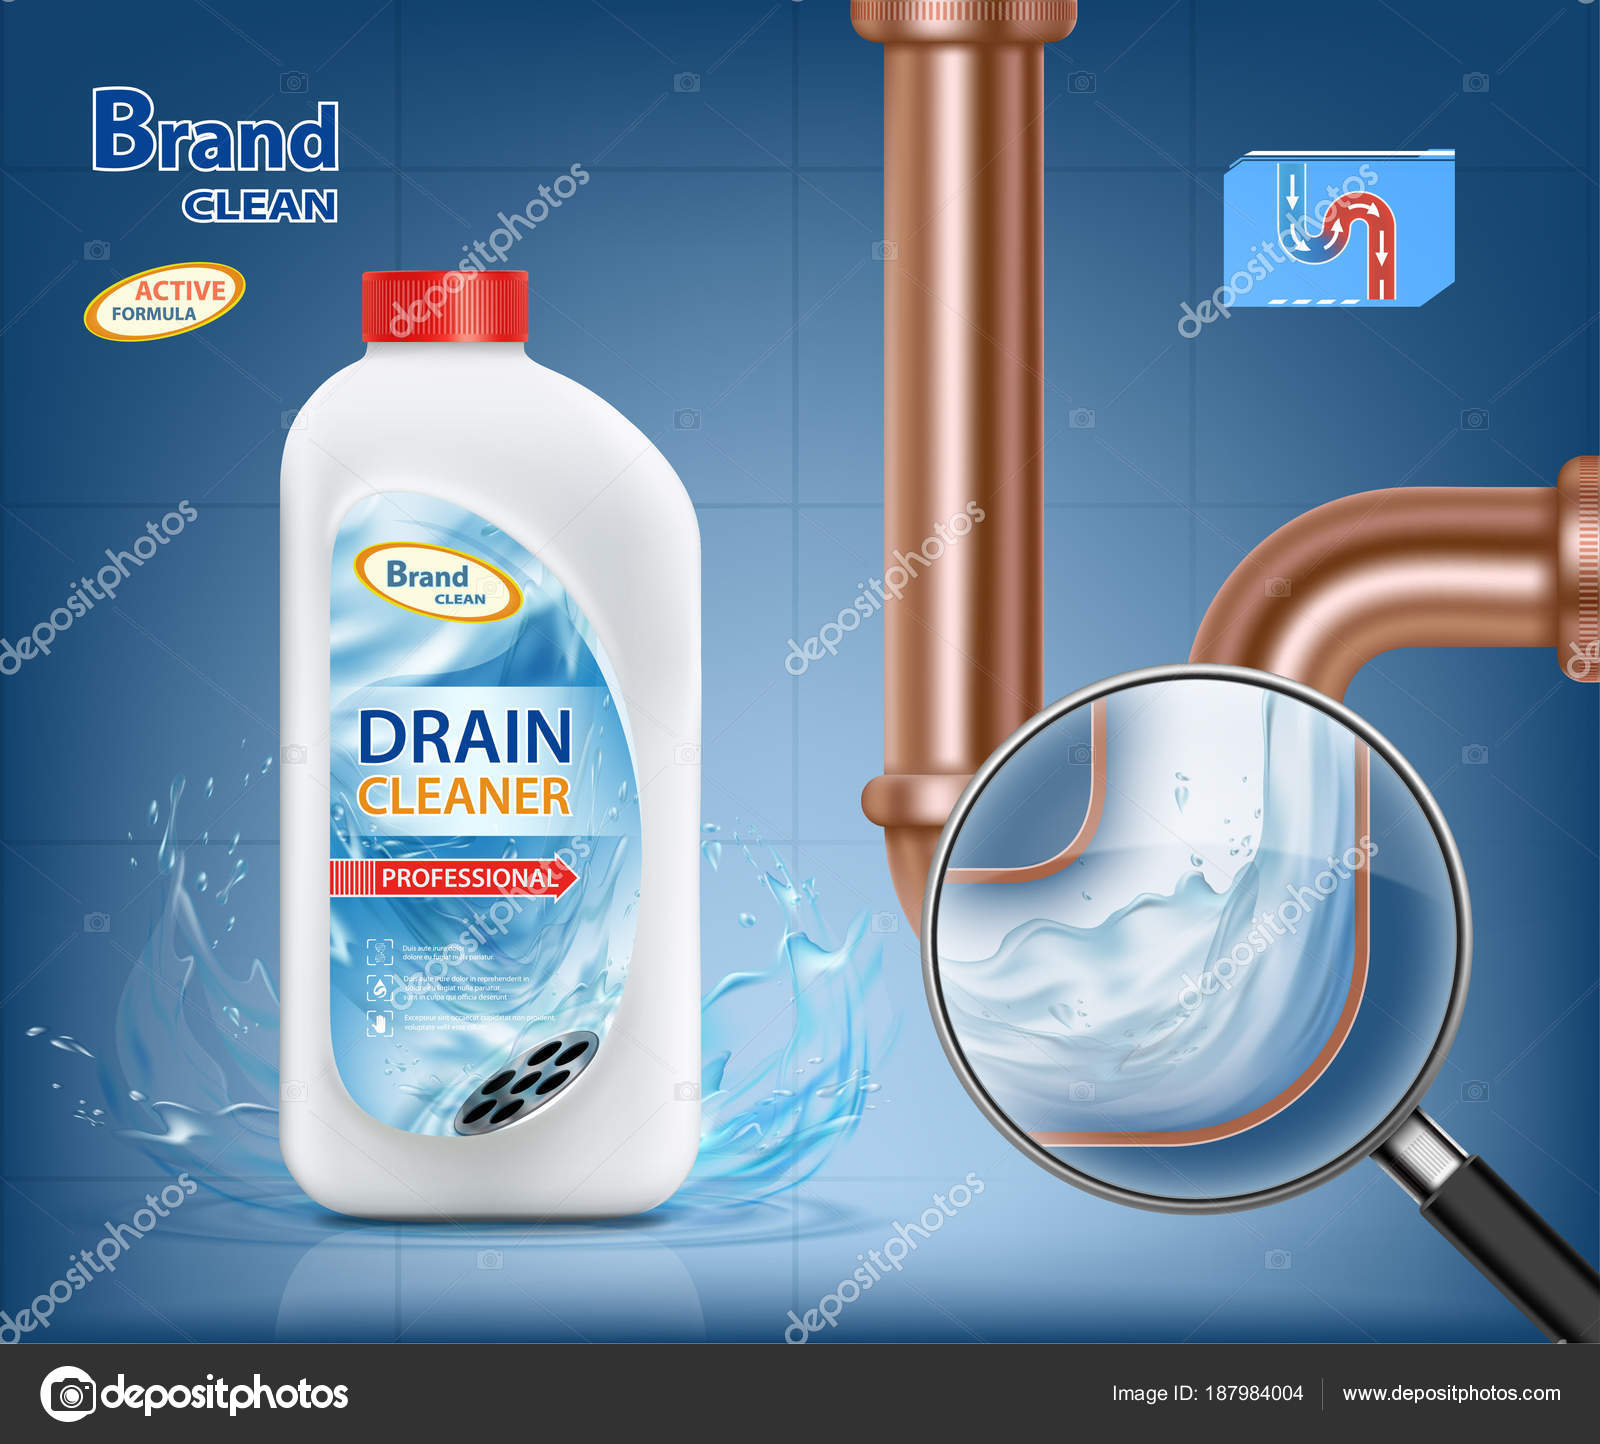 Download Plastic Package Drain Cleaner Detergent Bottle Pipe Siphon Mockup Container Vector Image By C Vantuz Vector Stock 187984004